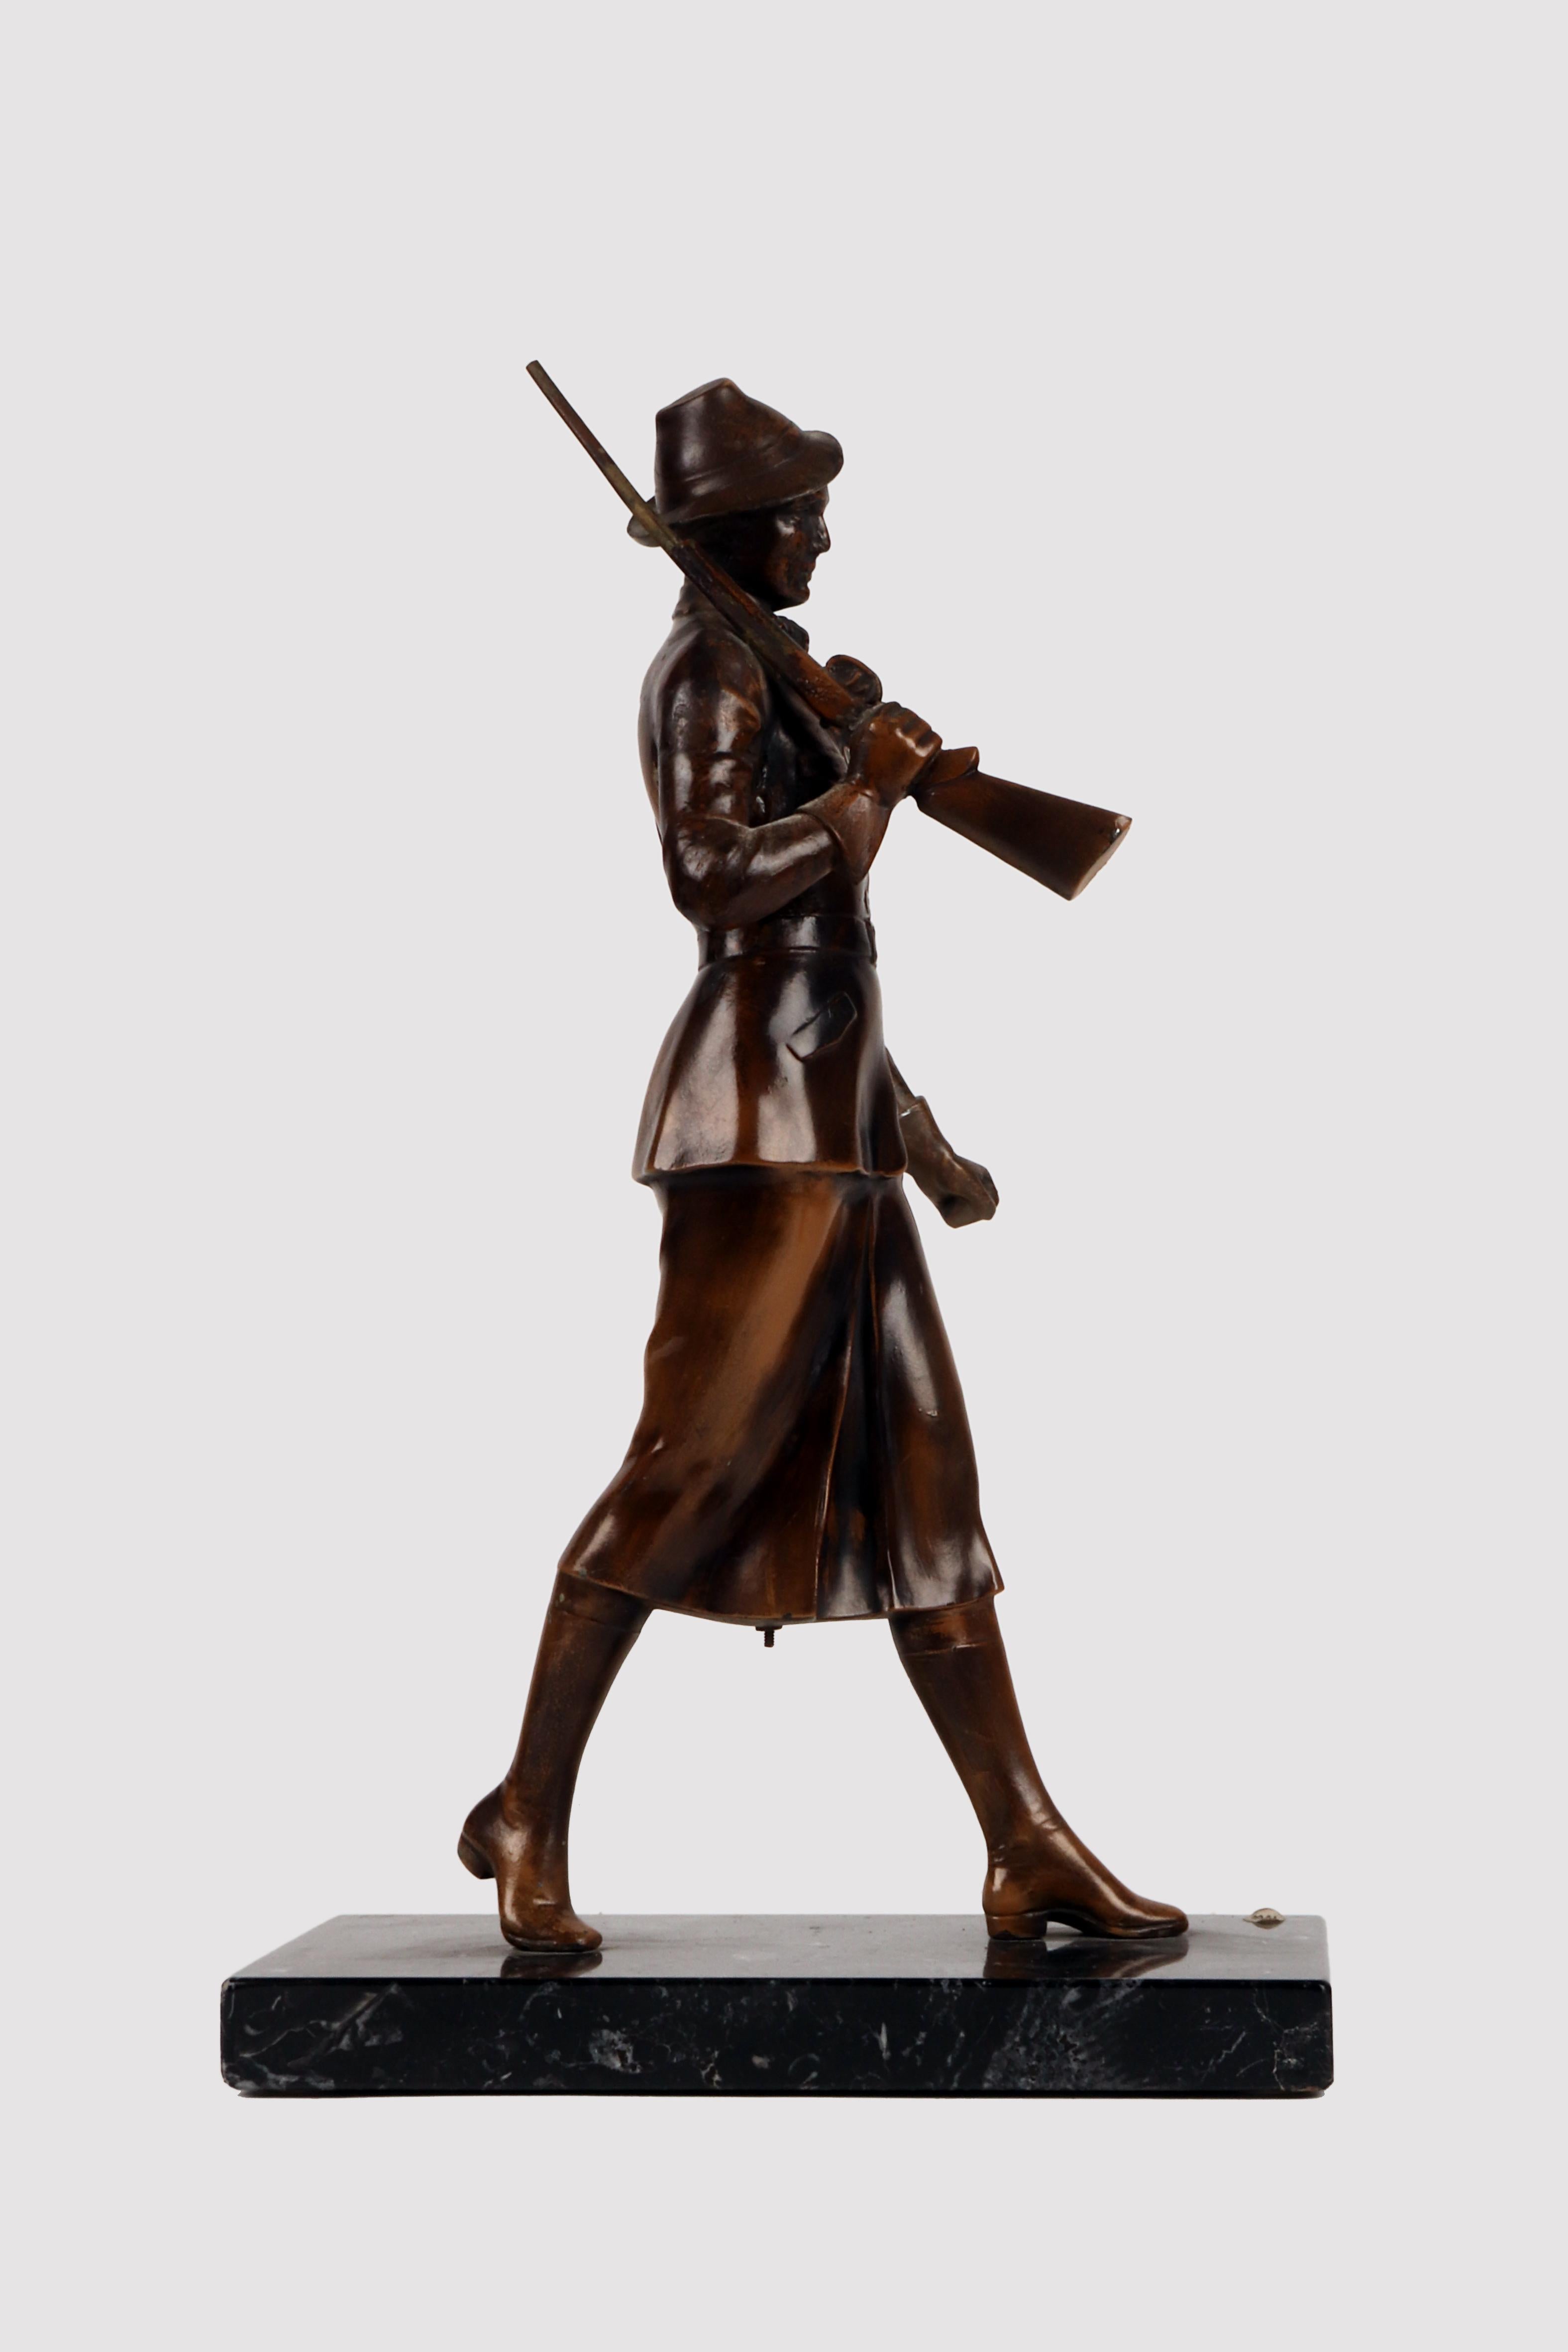 Bronze sculpture, depicting a figure of a huntress with a rifle on her shoulder and a hat, with a base in veined black marble. Original patina. Austria circa 1920.